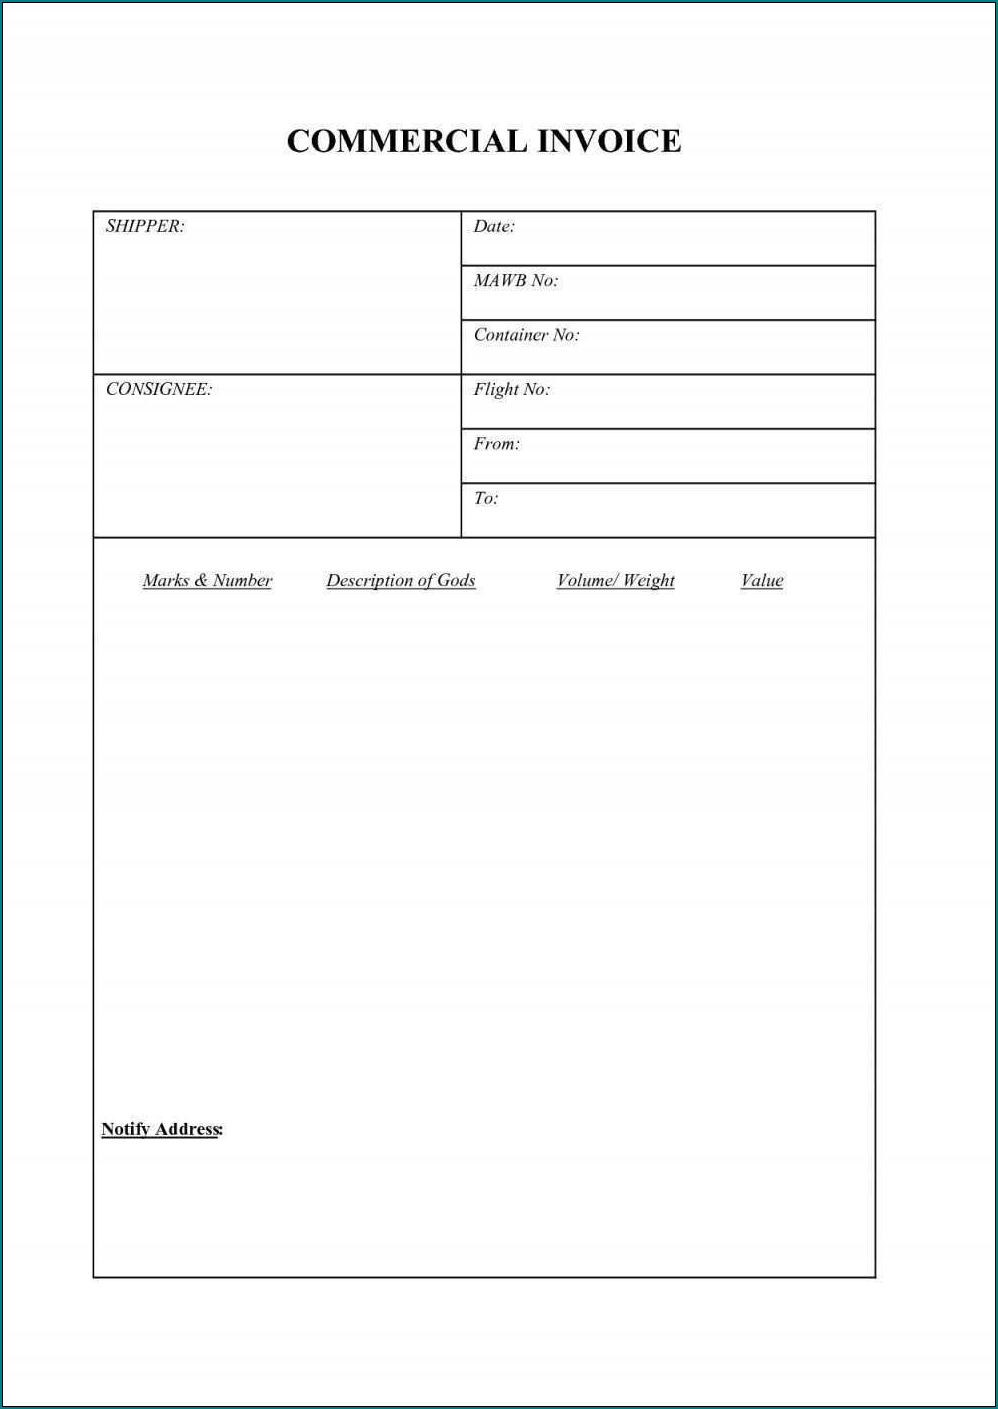 Sample of Commercial Invoice Template